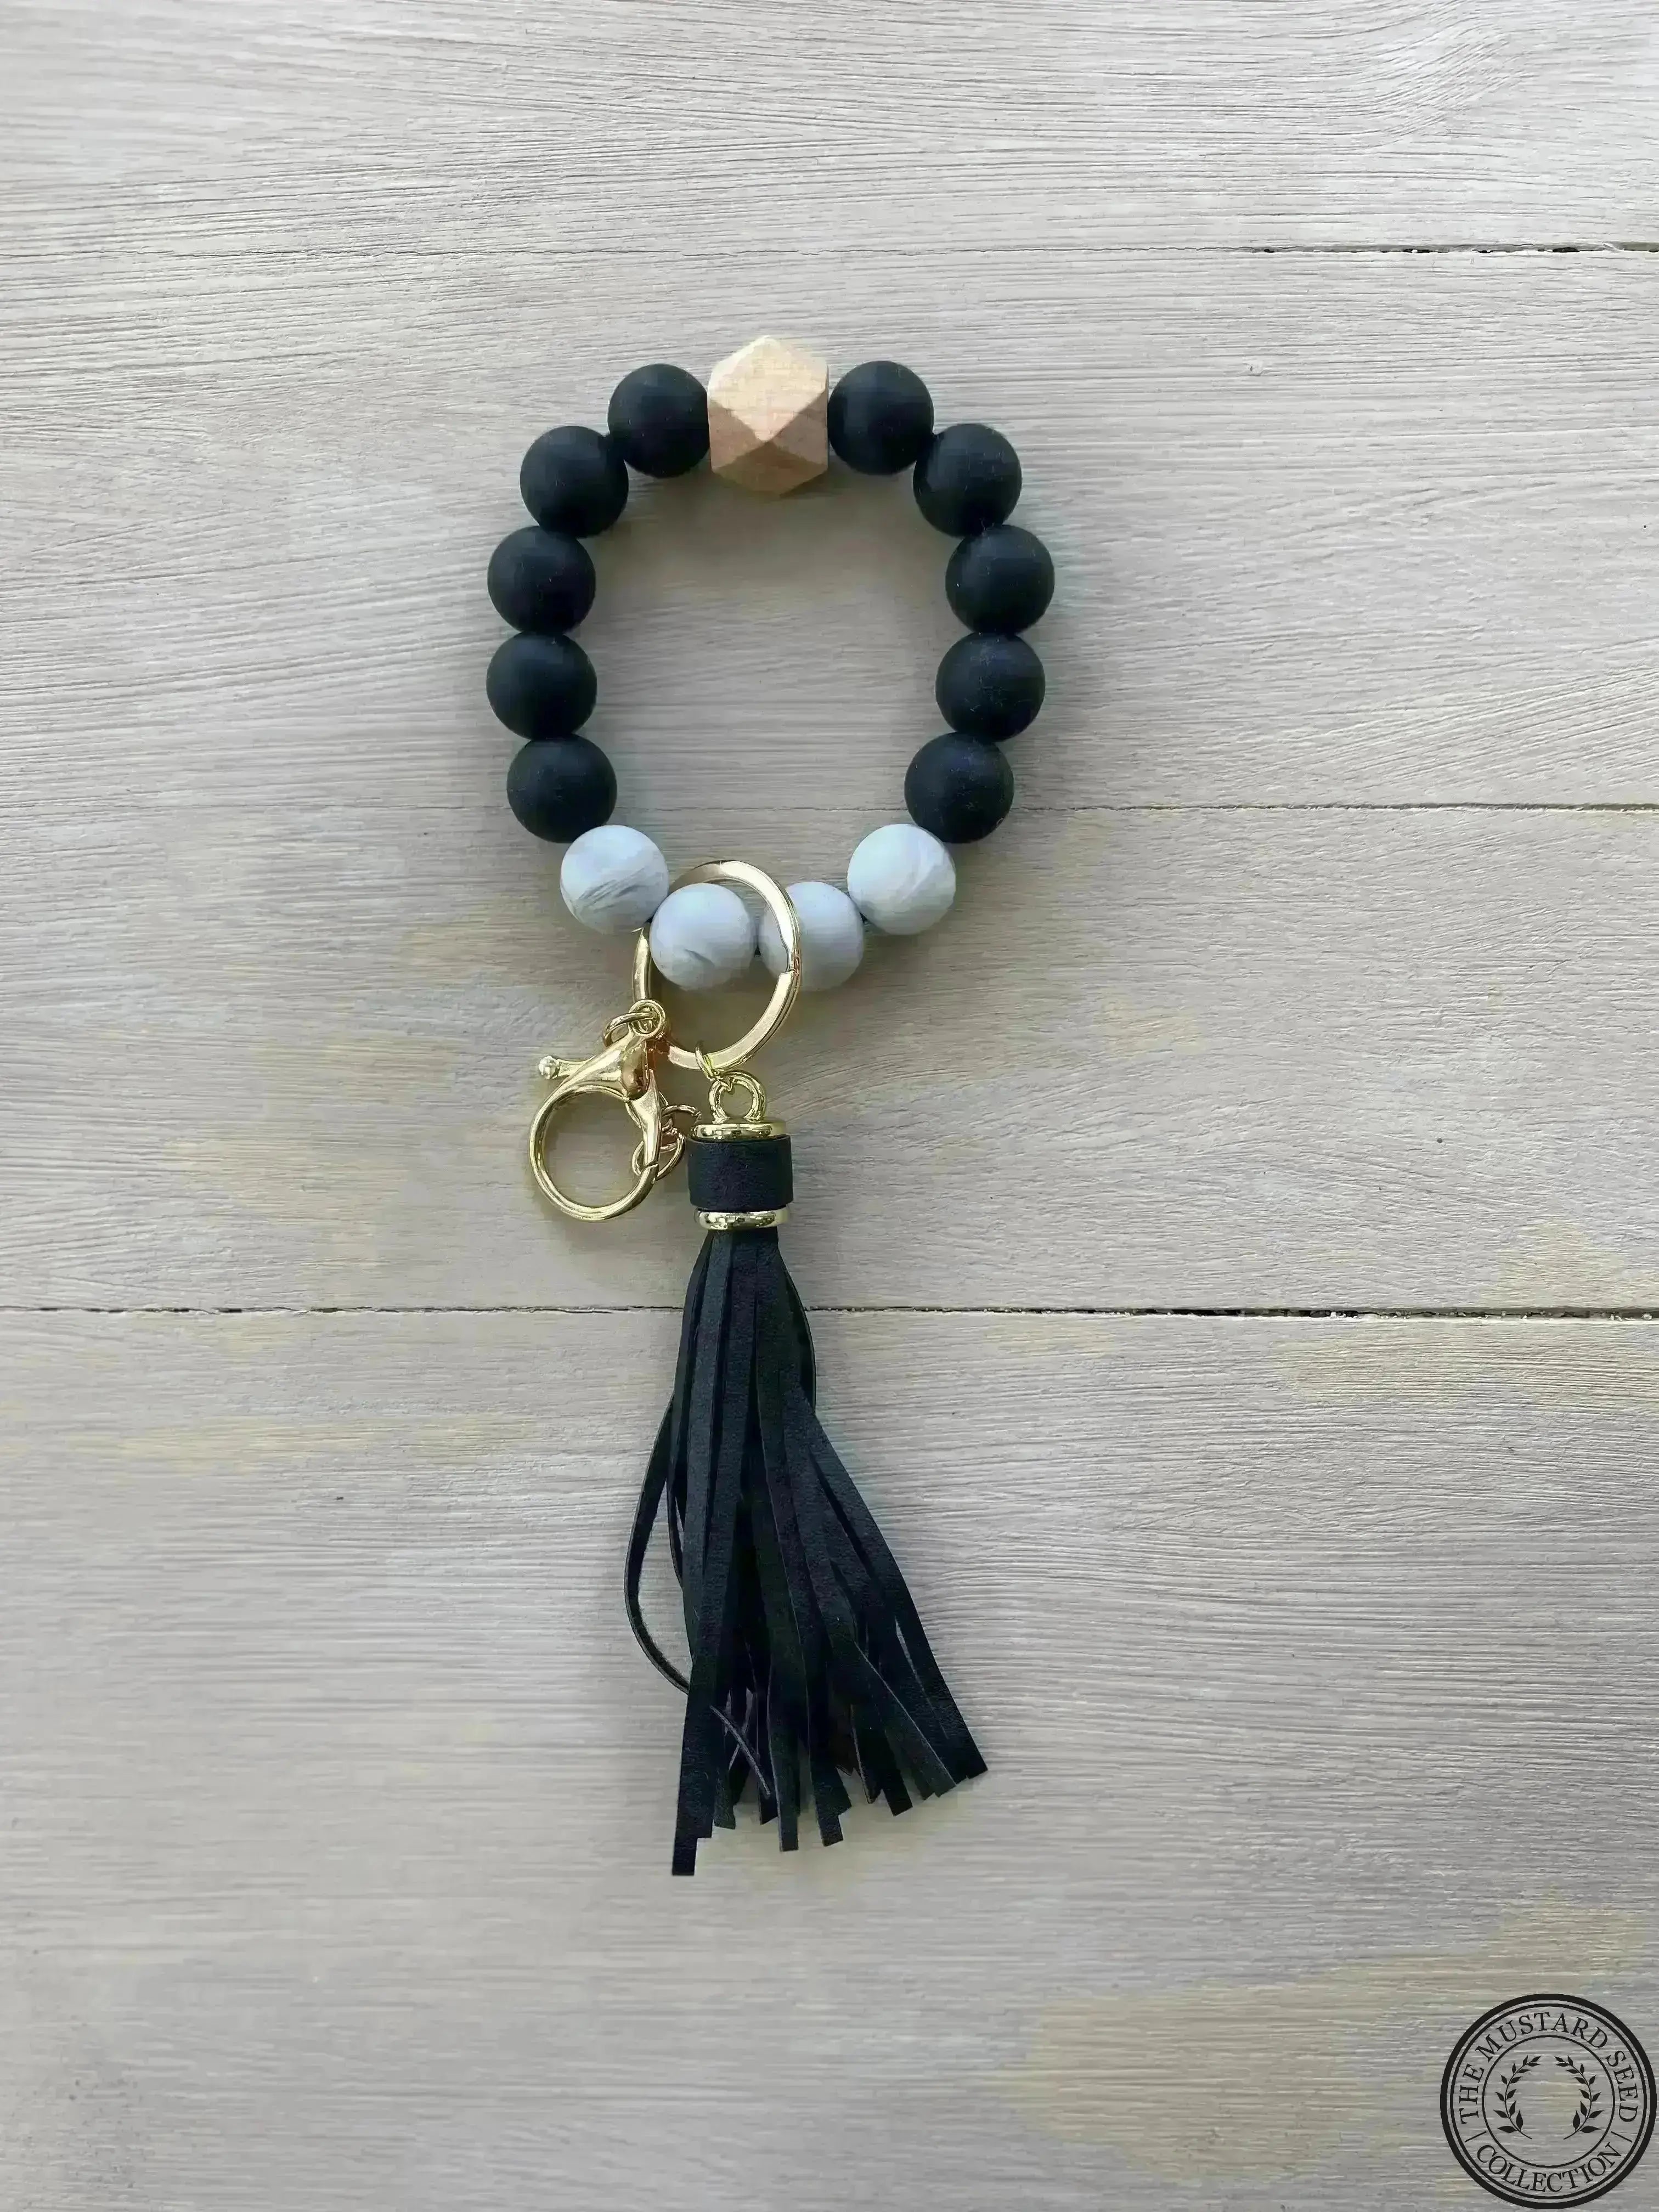 SVF Black and White Grey Marble Silicone Wristlet Beaded Key Chain Bracelet with Tassel and Motivational Engraved Acrylic Charm of choice! The Mustard Seed Collection, The Seed